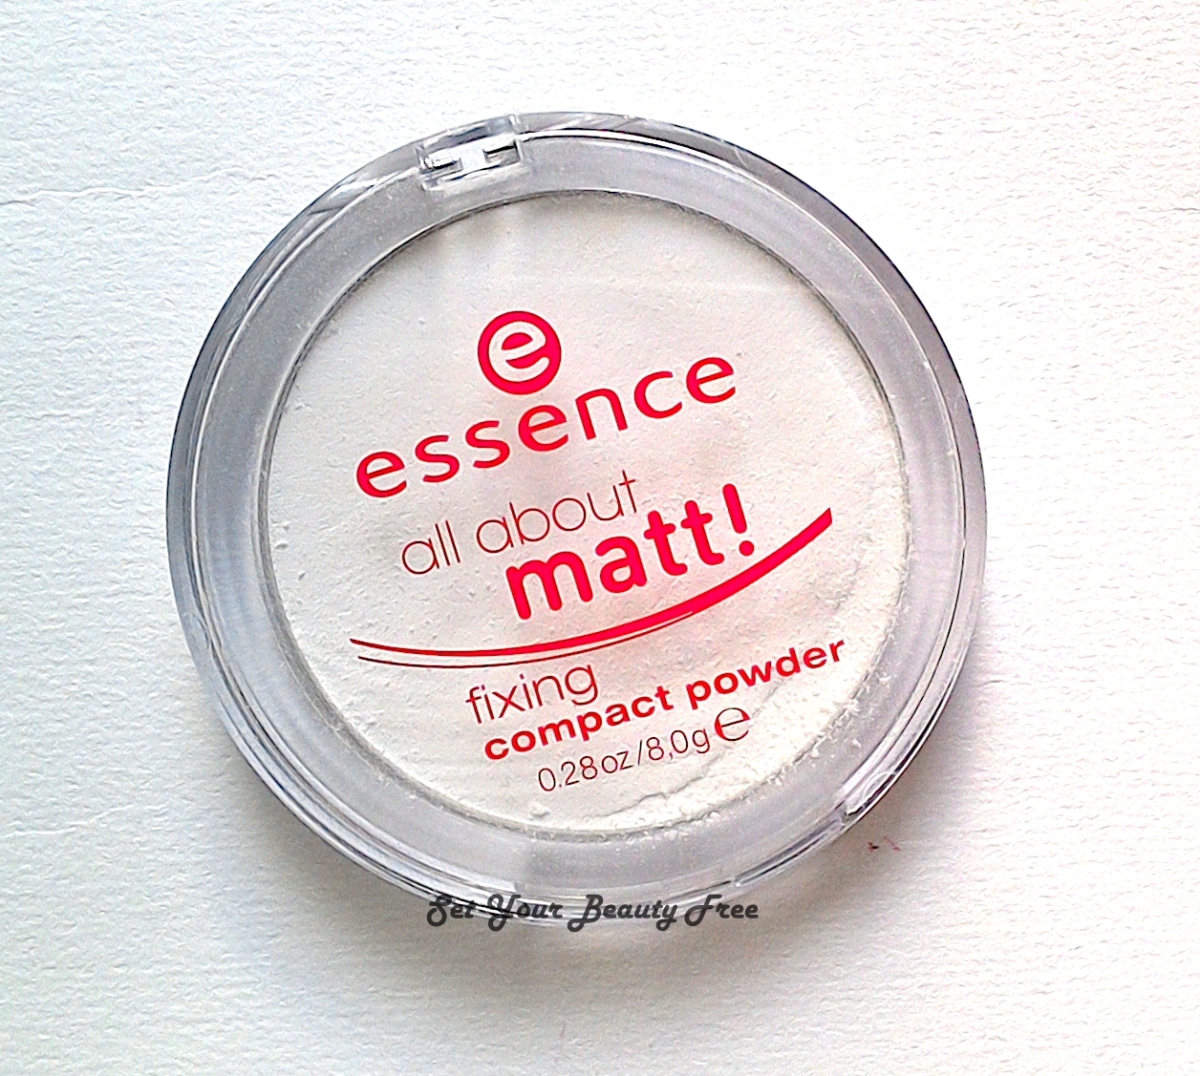 Free Powder About Essence [Review] Beauty Compact Matt! All Your Set – Fixing